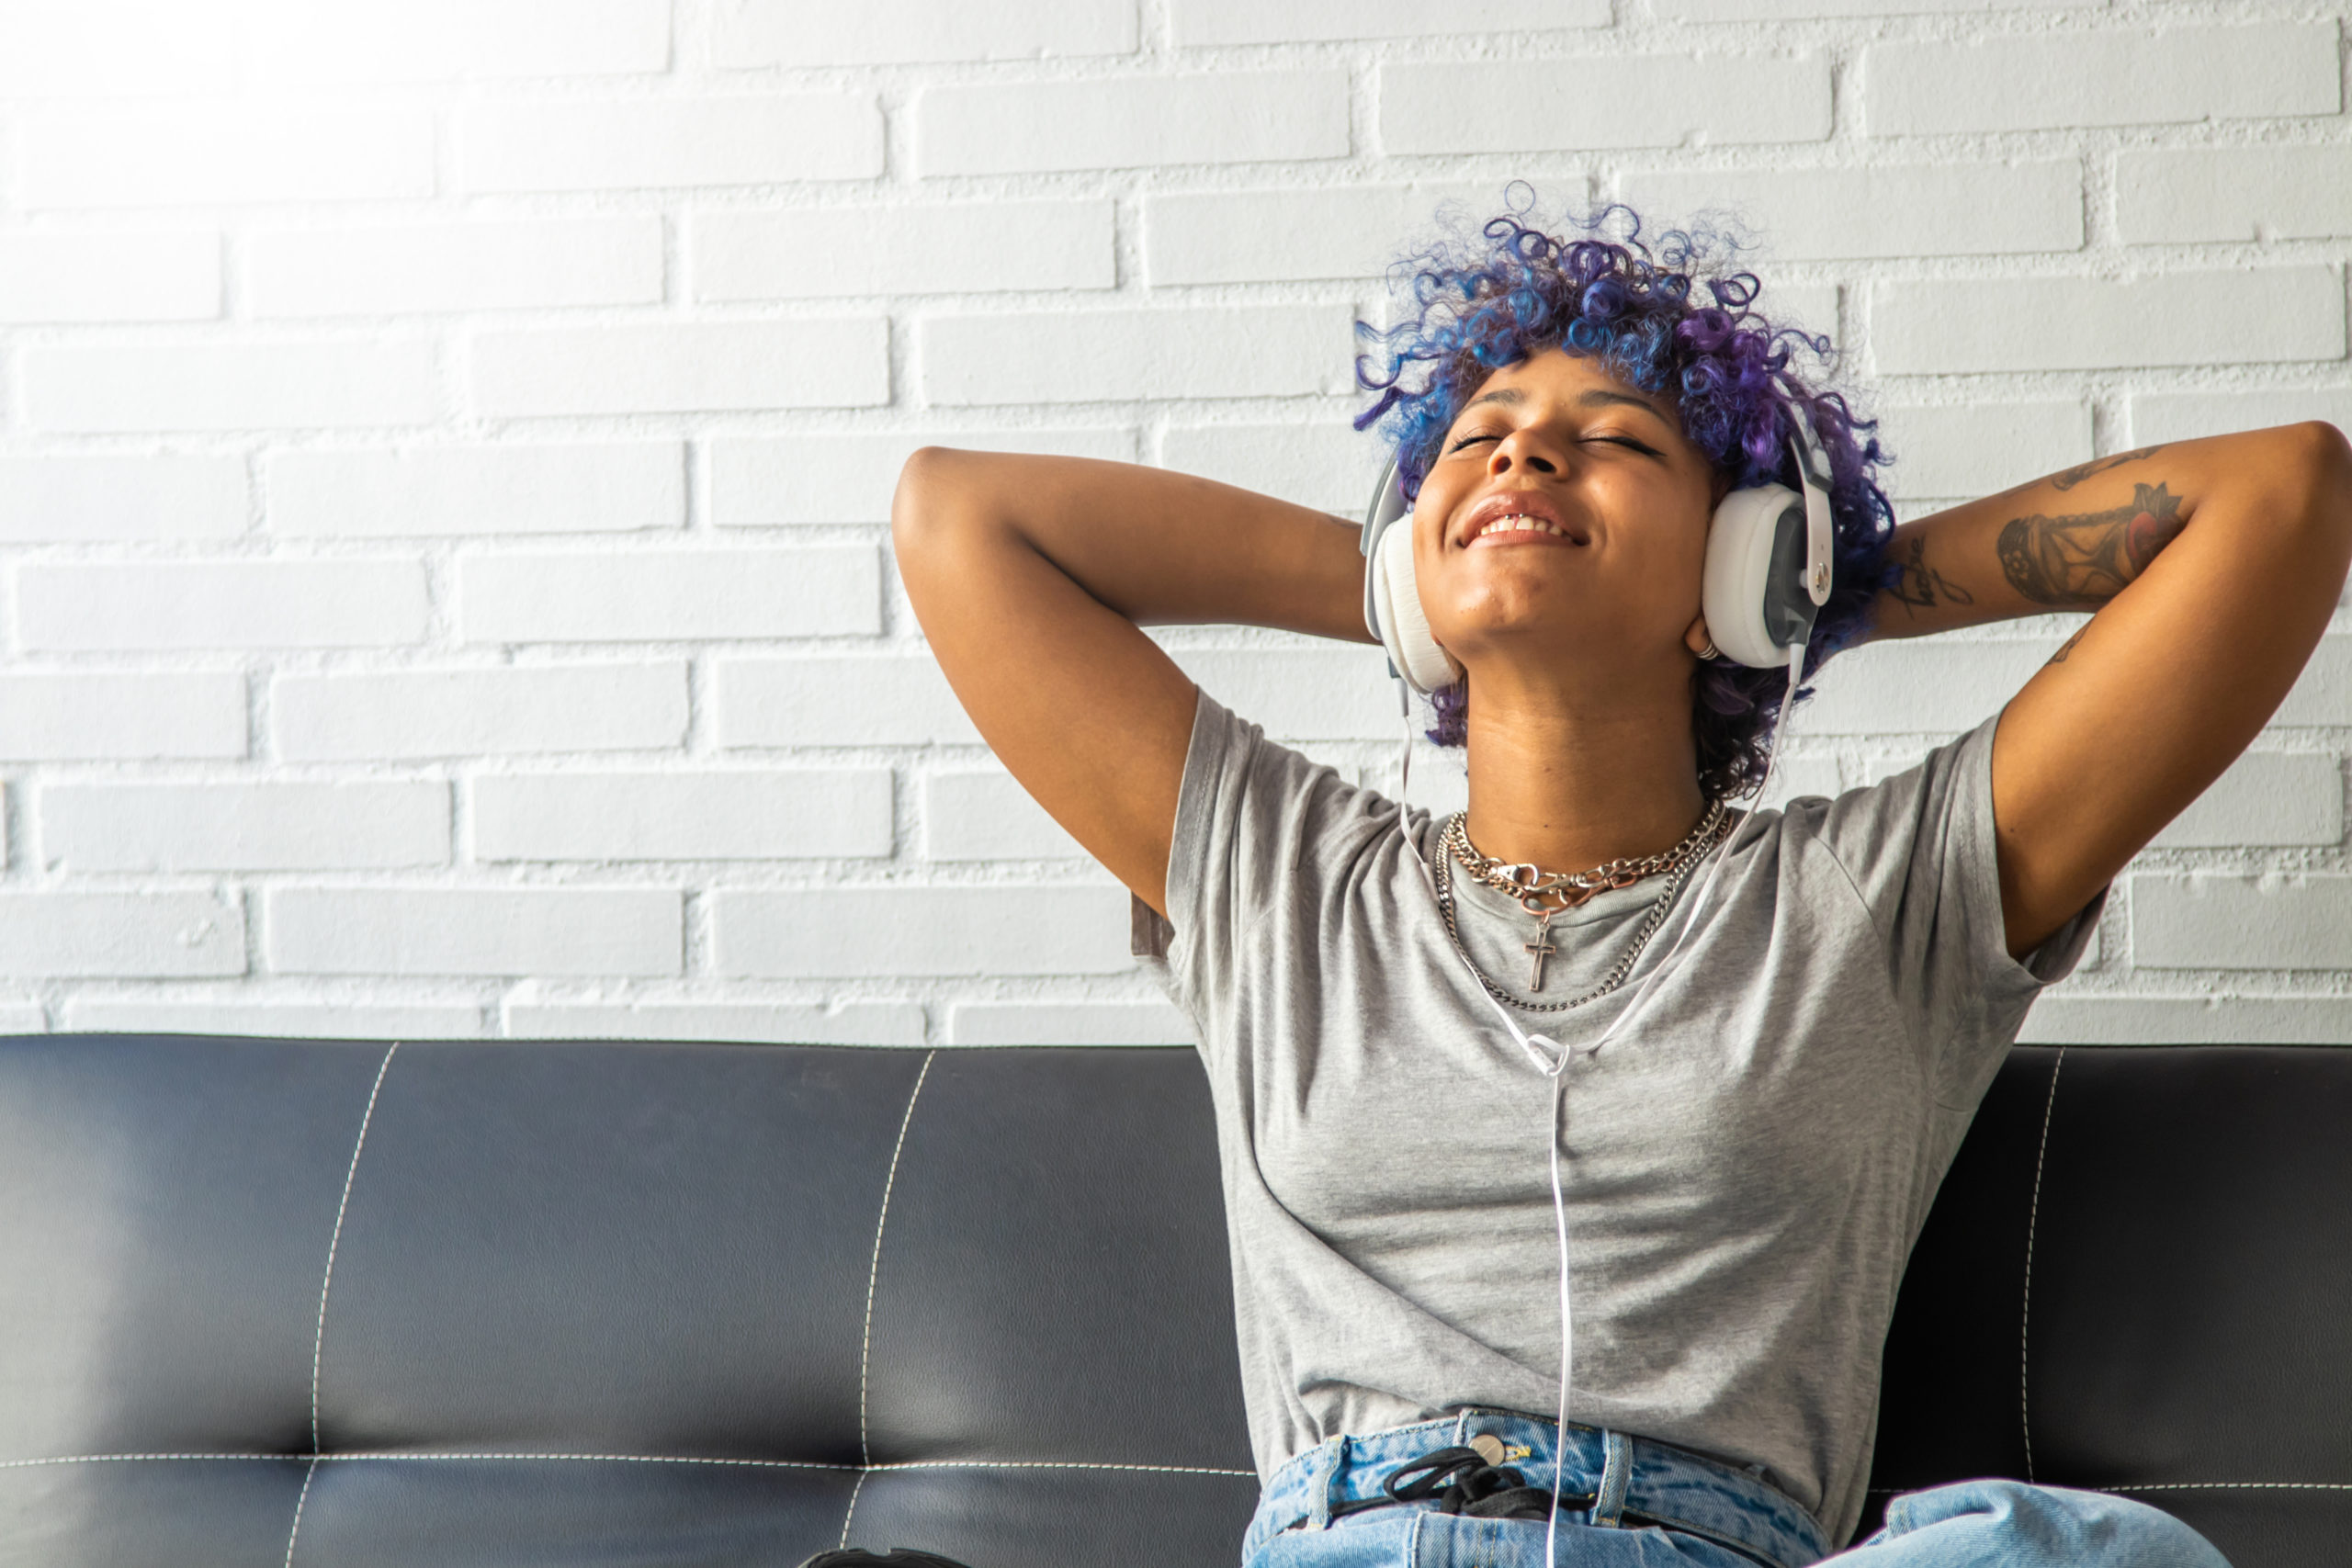 Young teen with blue hair listening to music and smiling.